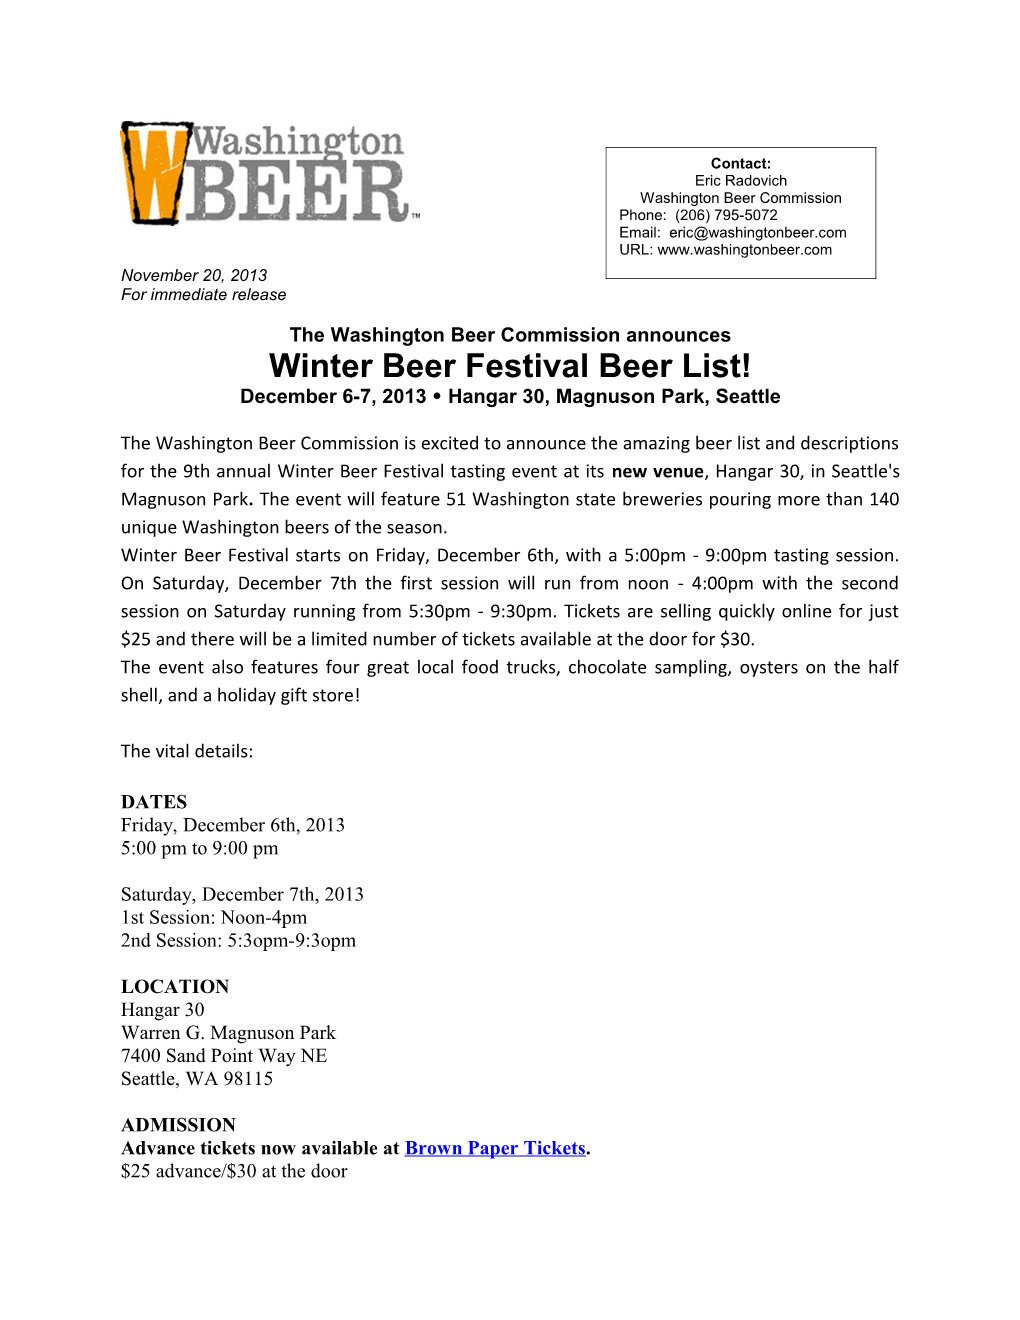 The Washington Beer Commission Announces